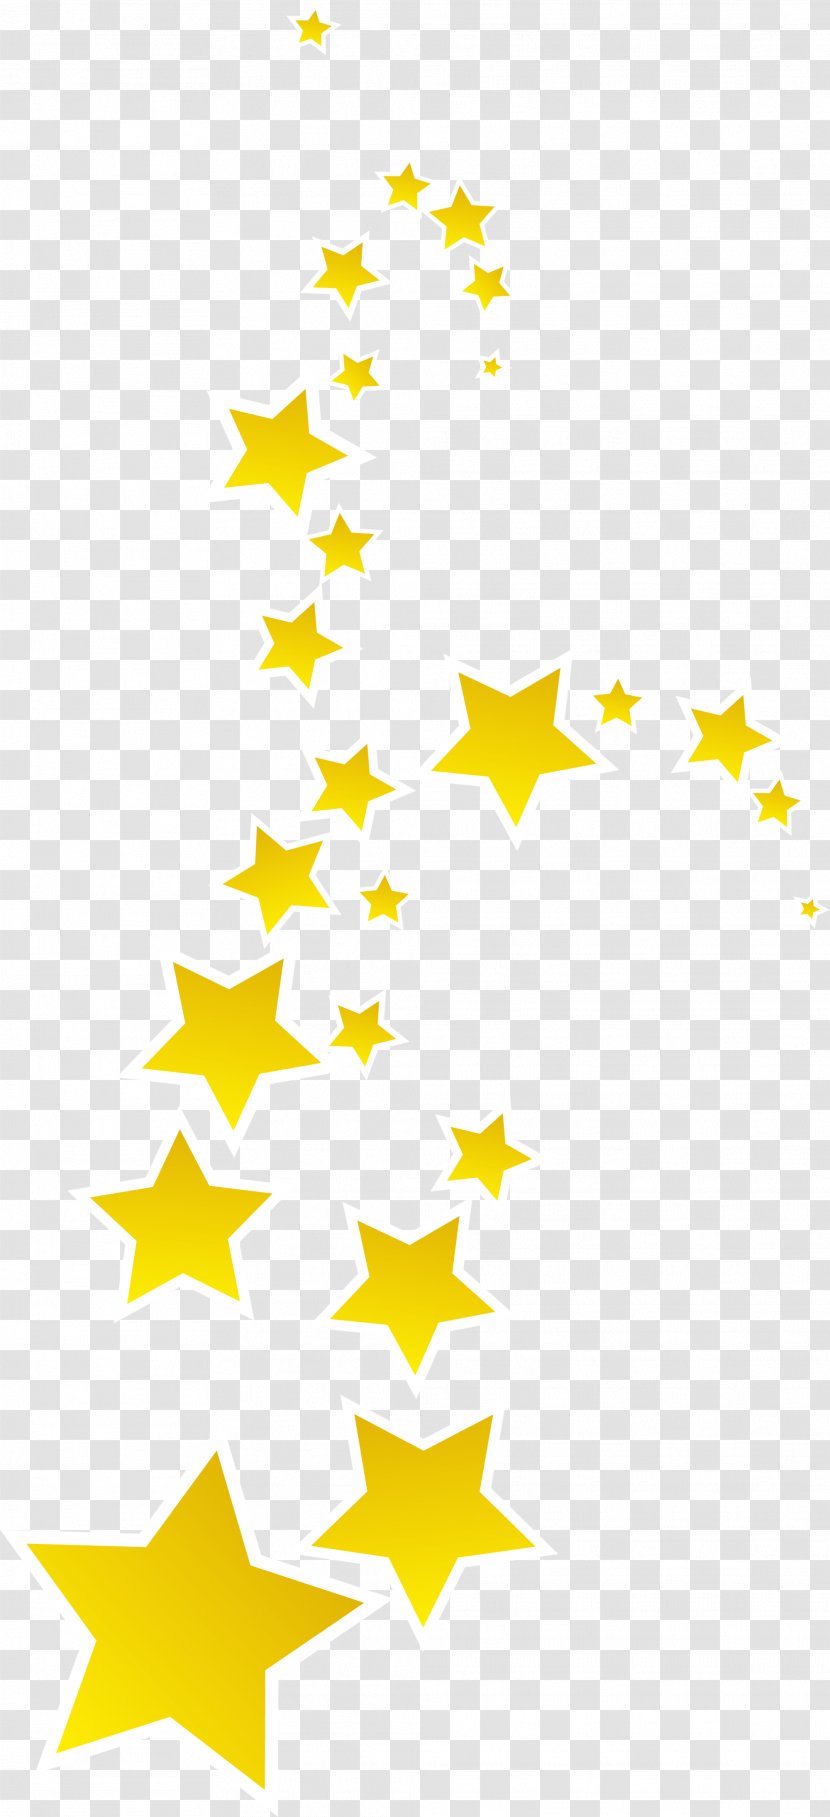 Indiana National Organization For Women Princess Truly In I Am (Princess Truly) Feminism - Star - Yellow Floating Stars Transparent PNG